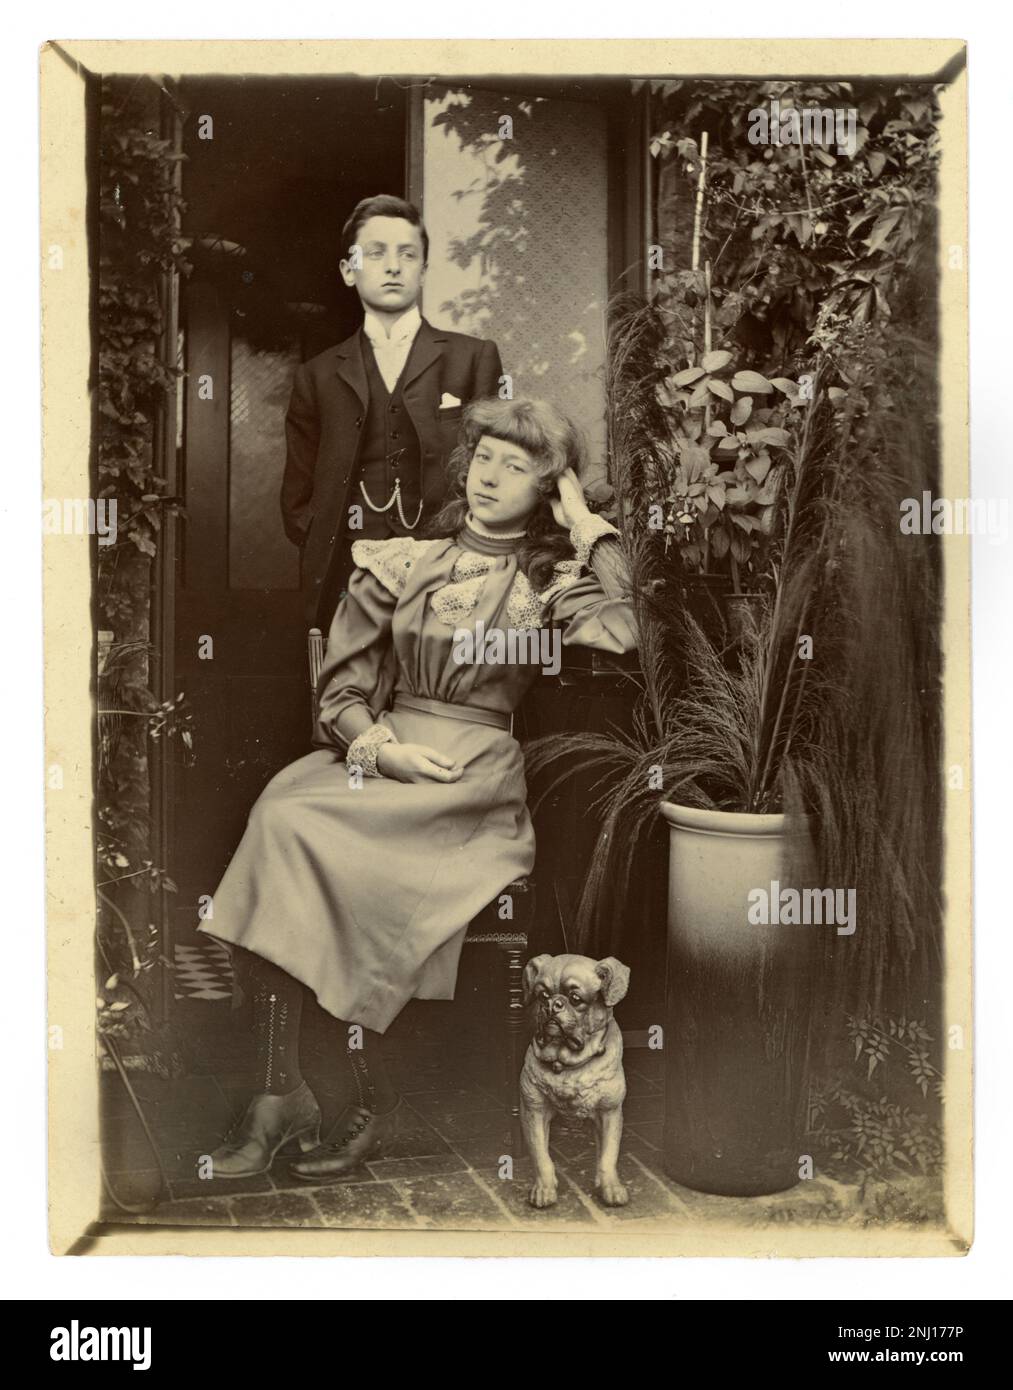 Original Victorian era photograph of stroppy / belligerent looking teenagers - a middle class attractive boy and girl, probably brother and sister. A small pug dog sits next to them, wearing a collar with bells on it - a naughty one! It's a relaxed, informal photograph taken outside a house in the doorway of their home, potted plants next to them, circa 1899 Stock Photo